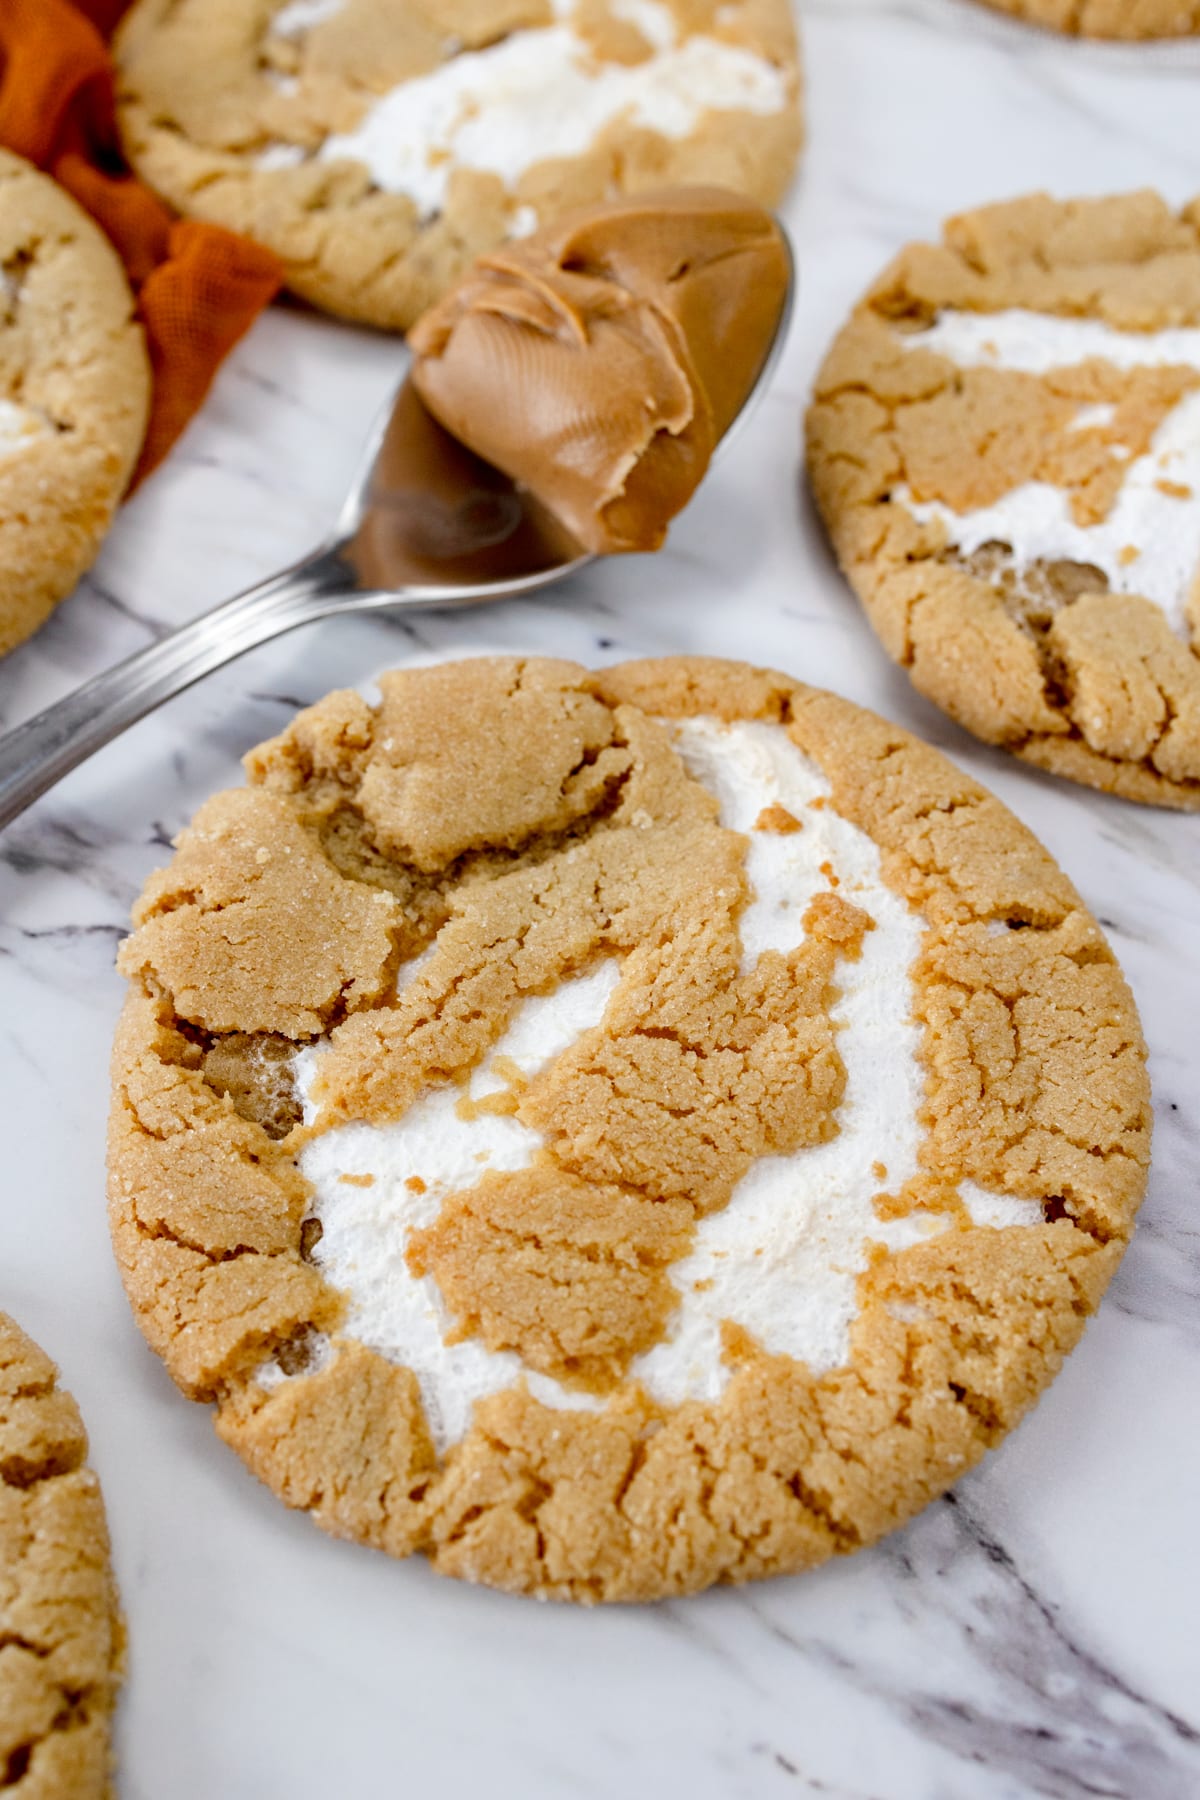 Top view of Fluffernutter Cookies next to a teaspoon of peanut butter on a decorated table.